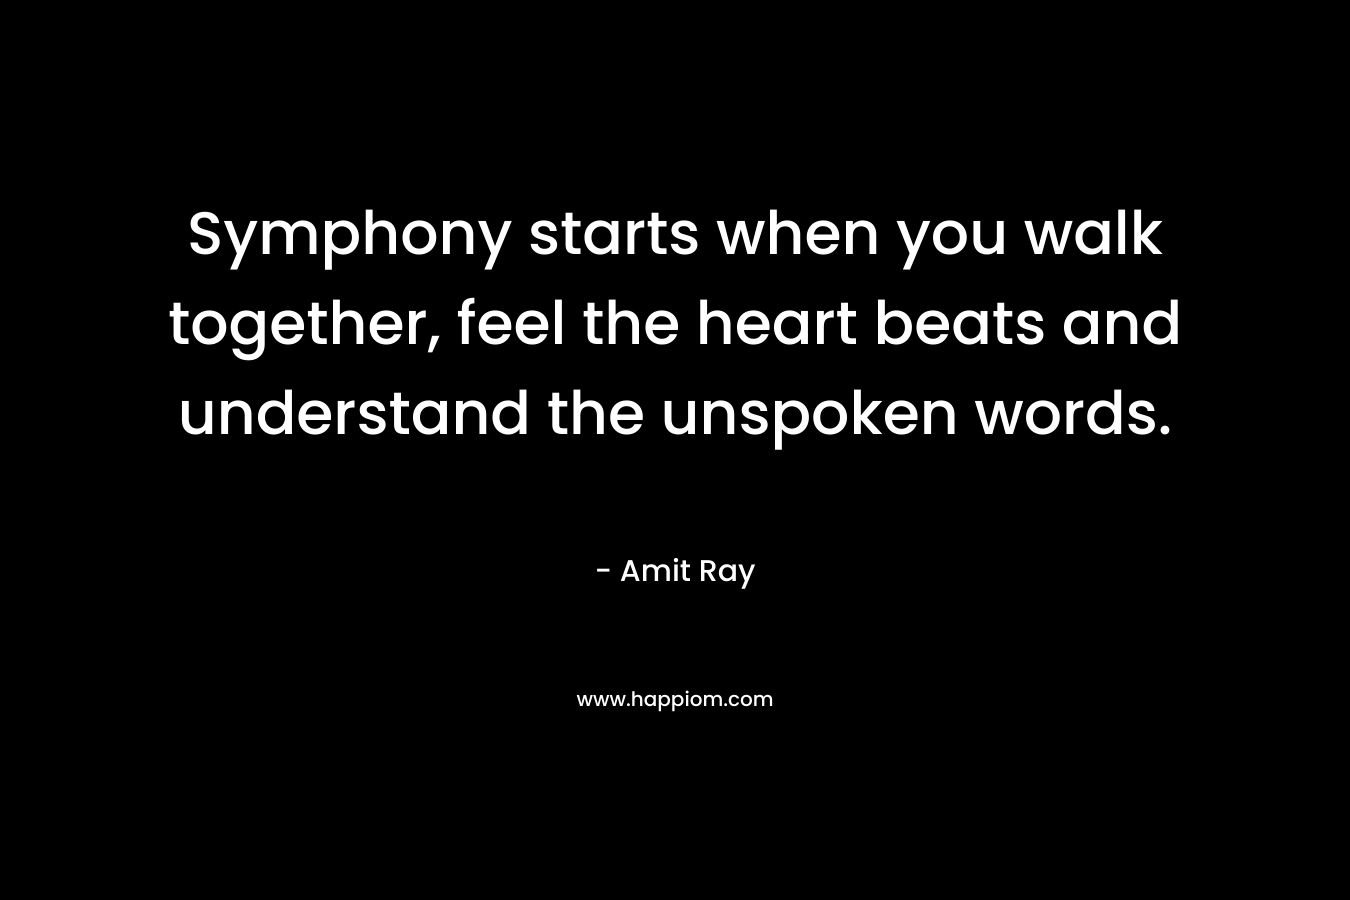 Symphony starts when you walk together, feel the heart beats and understand the unspoken words.